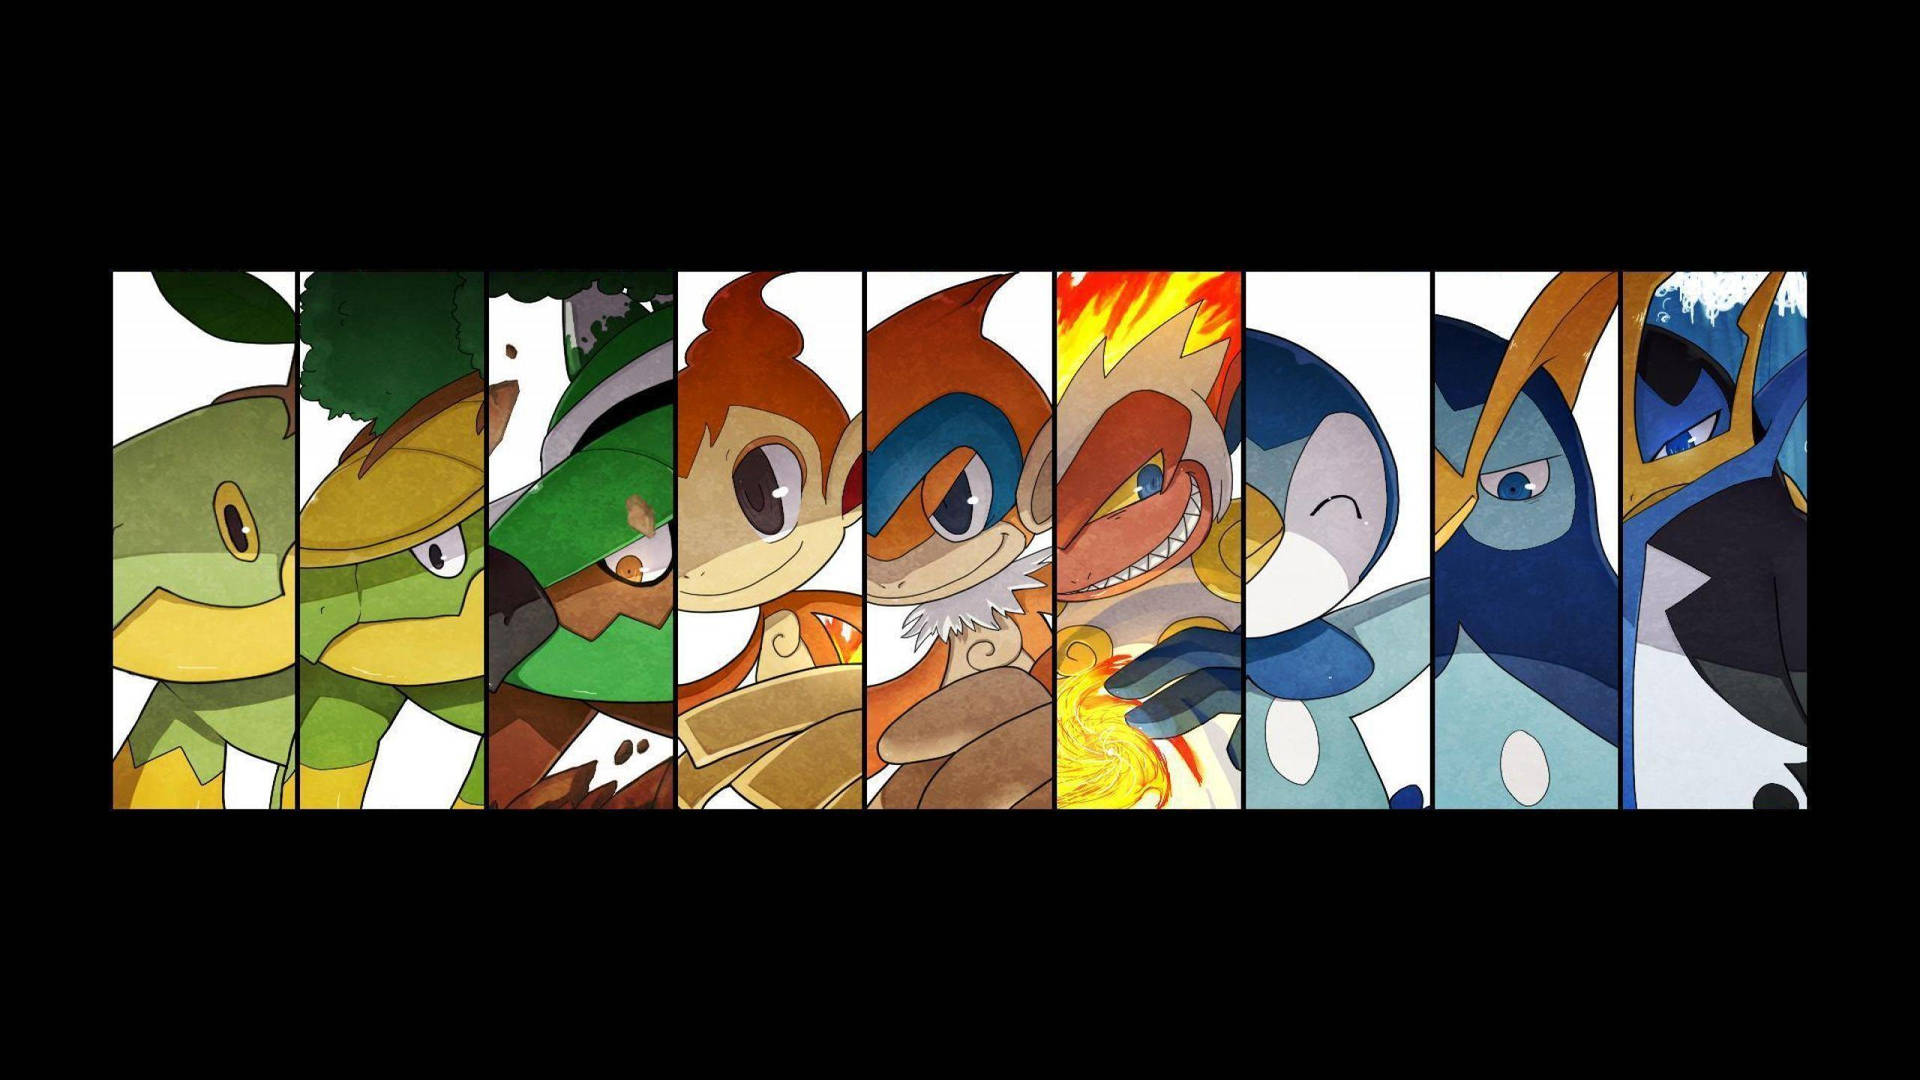 Chimchar And Other Pokemon Side-by-side Wallpaper